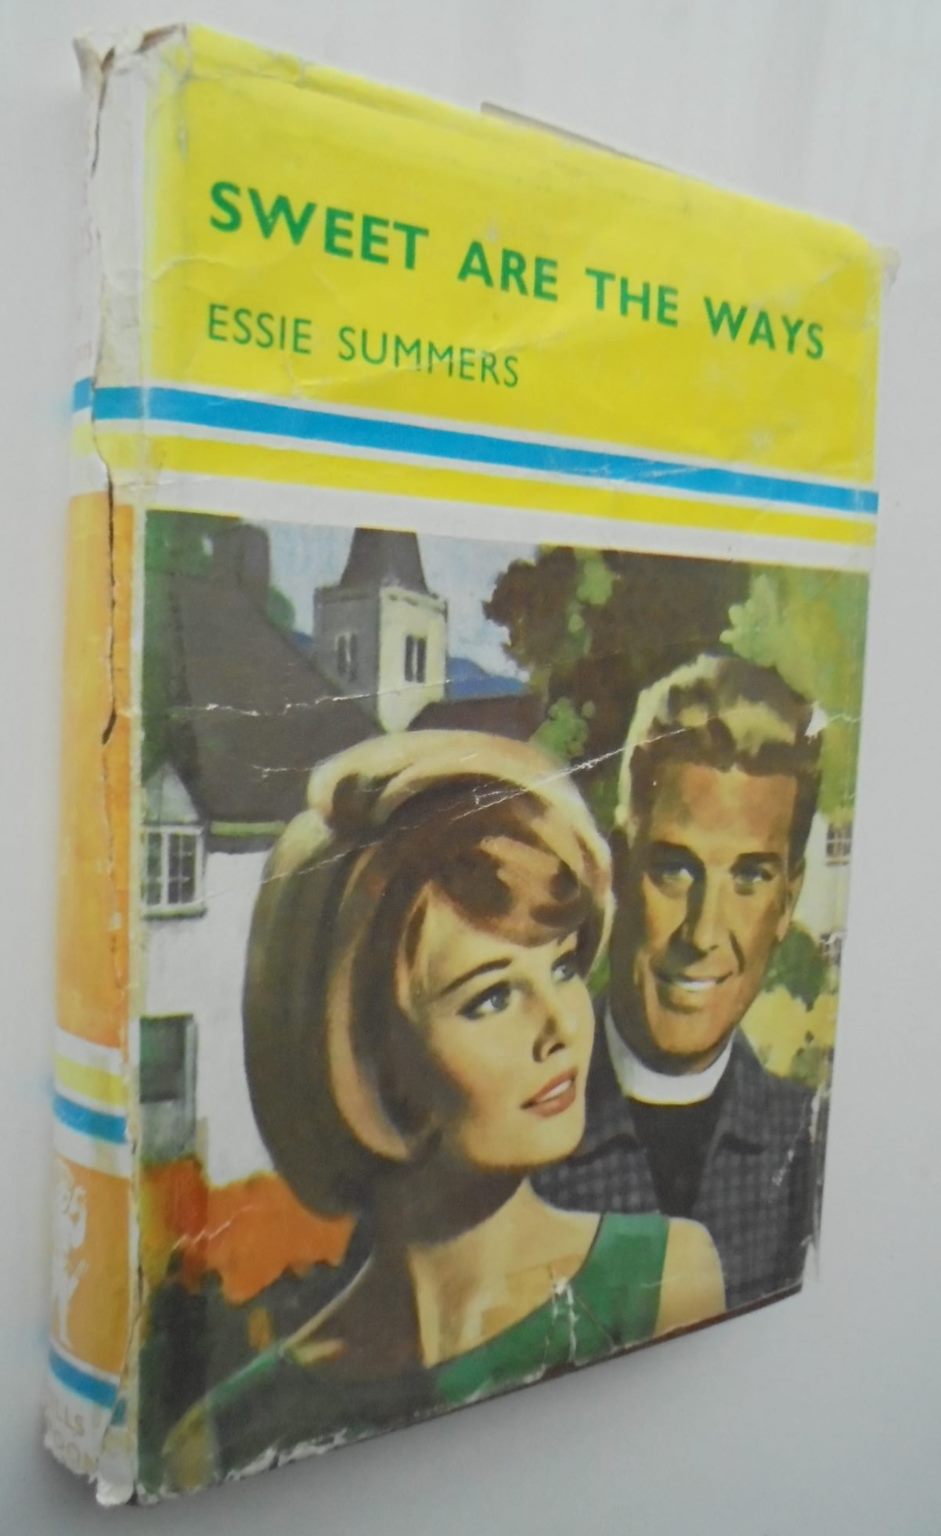 Sweet are the Ways (1965). By Essie Summers. Mills & Boon, 1965 FIRST EDITION.